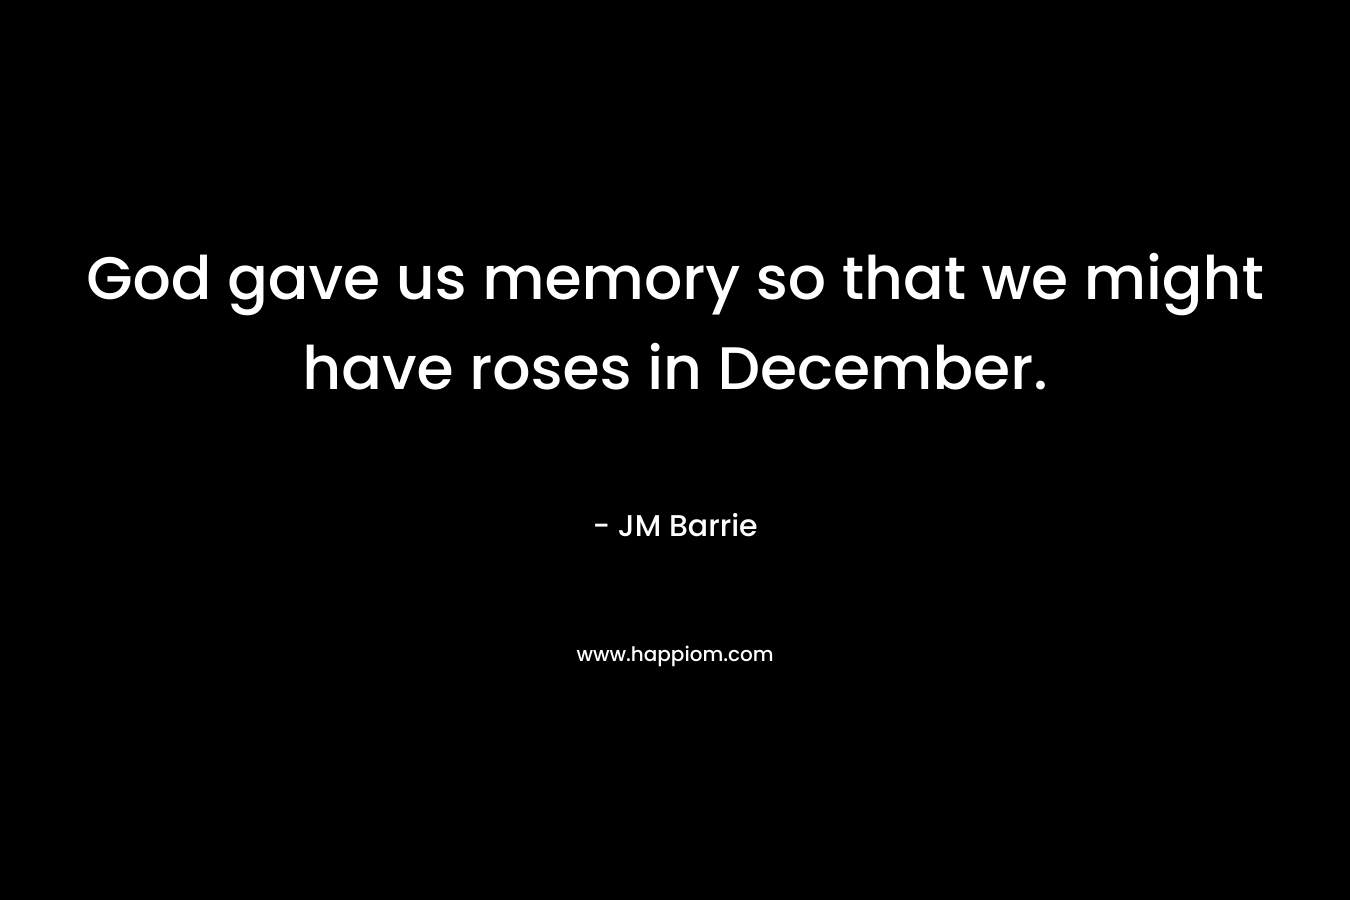 God gave us memory so that we might have roses in December. – JM Barrie